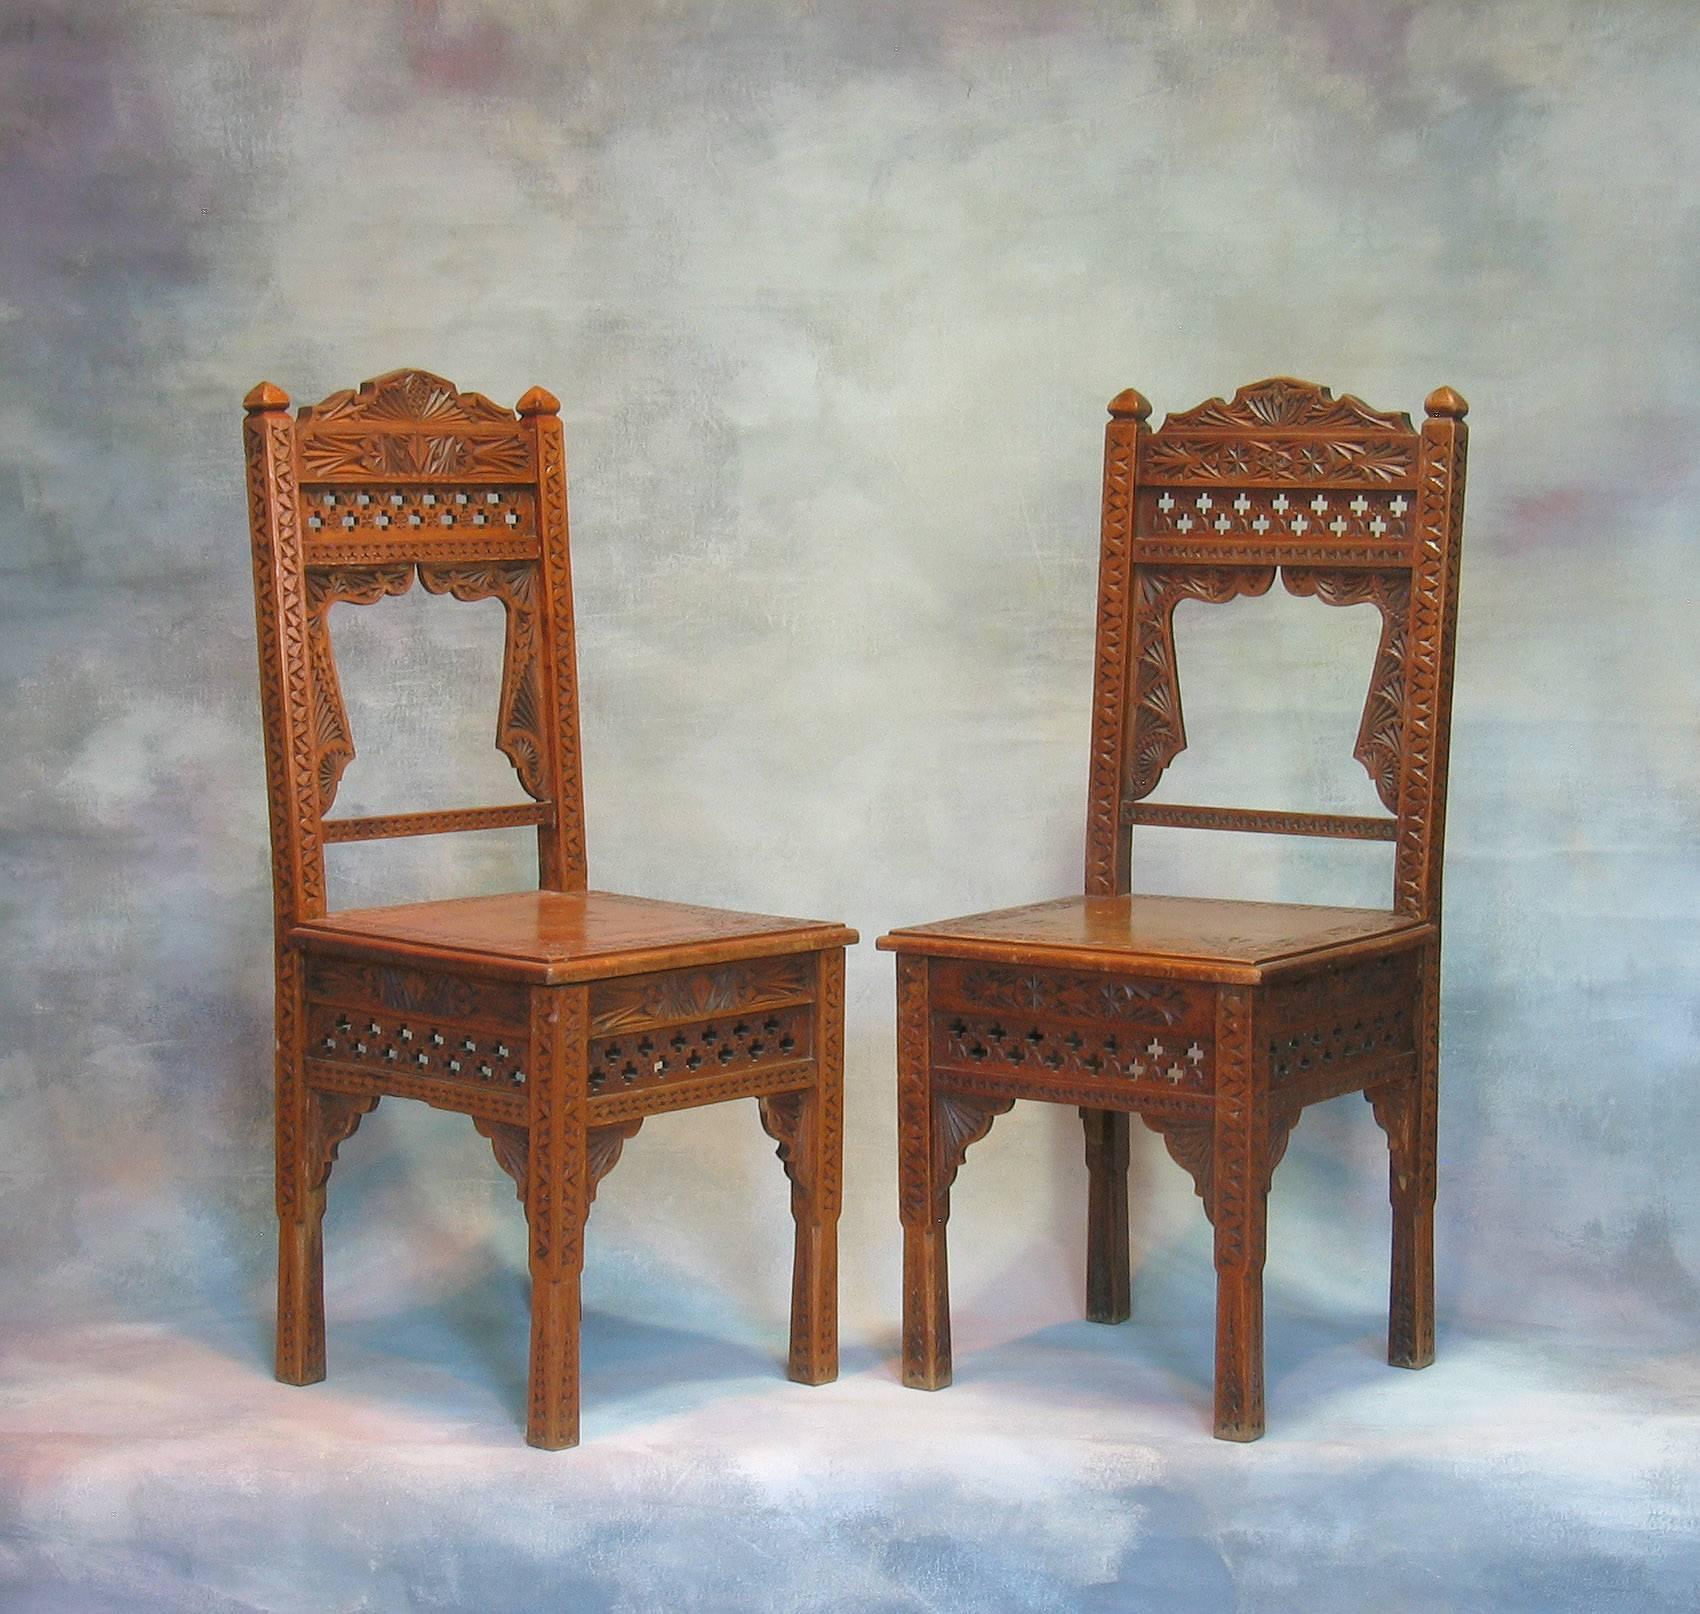 20th Century Pair of Middle Eastern Carved Hardwood Side Chairs